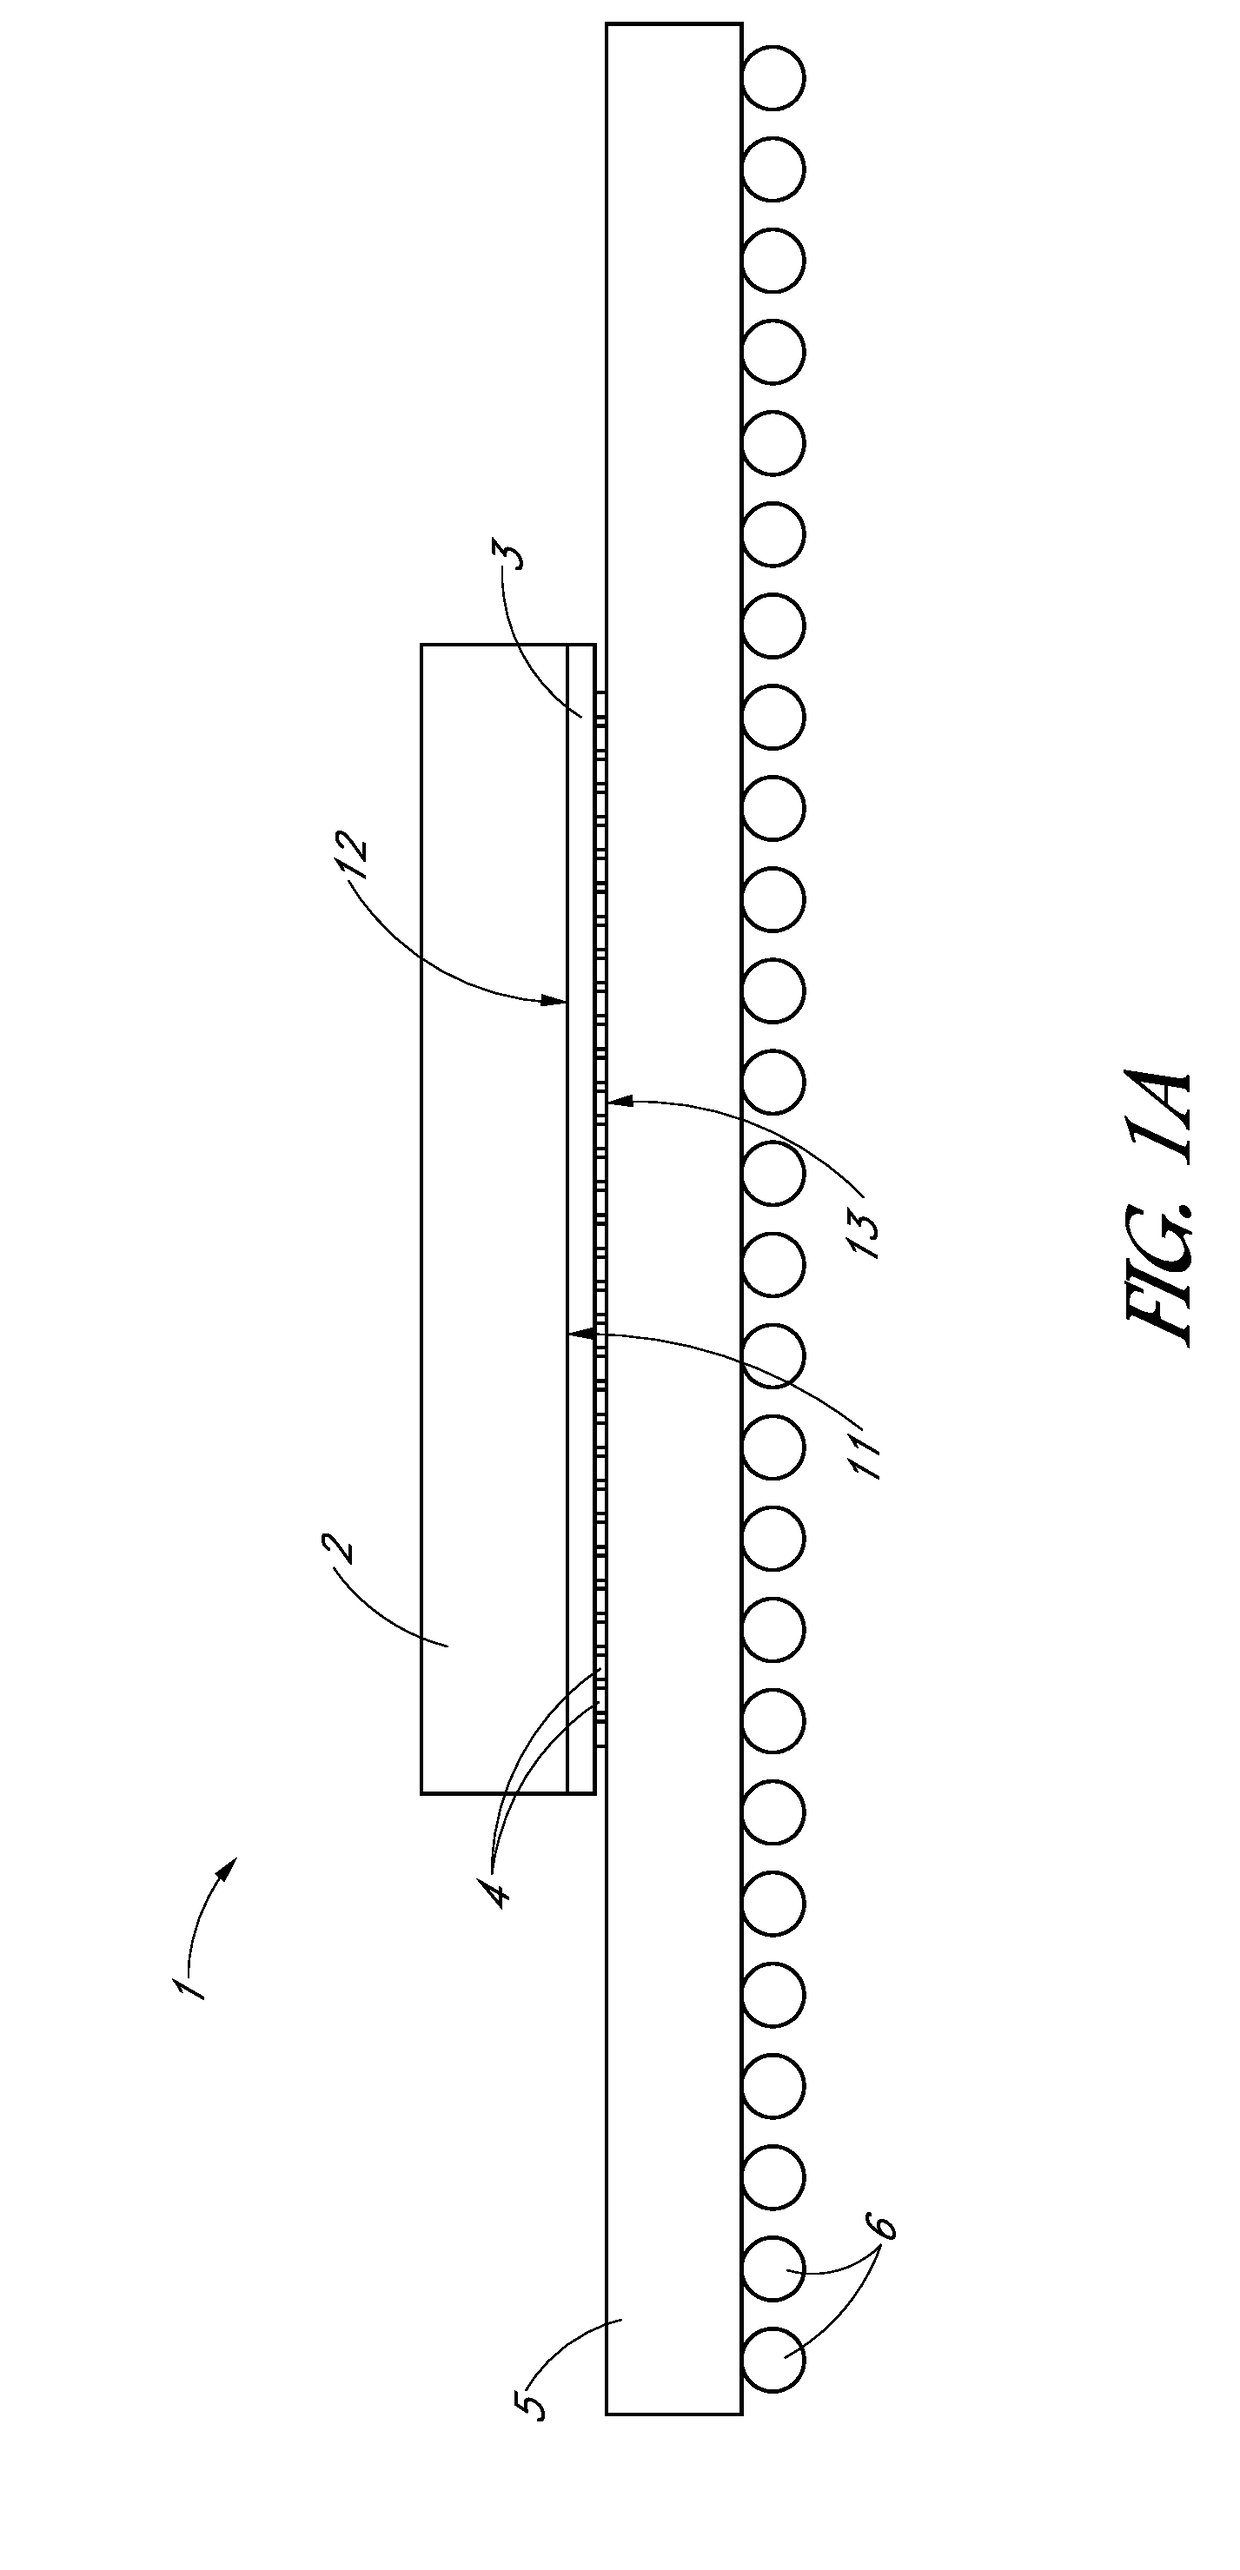 Bonded structures with integrated passive component